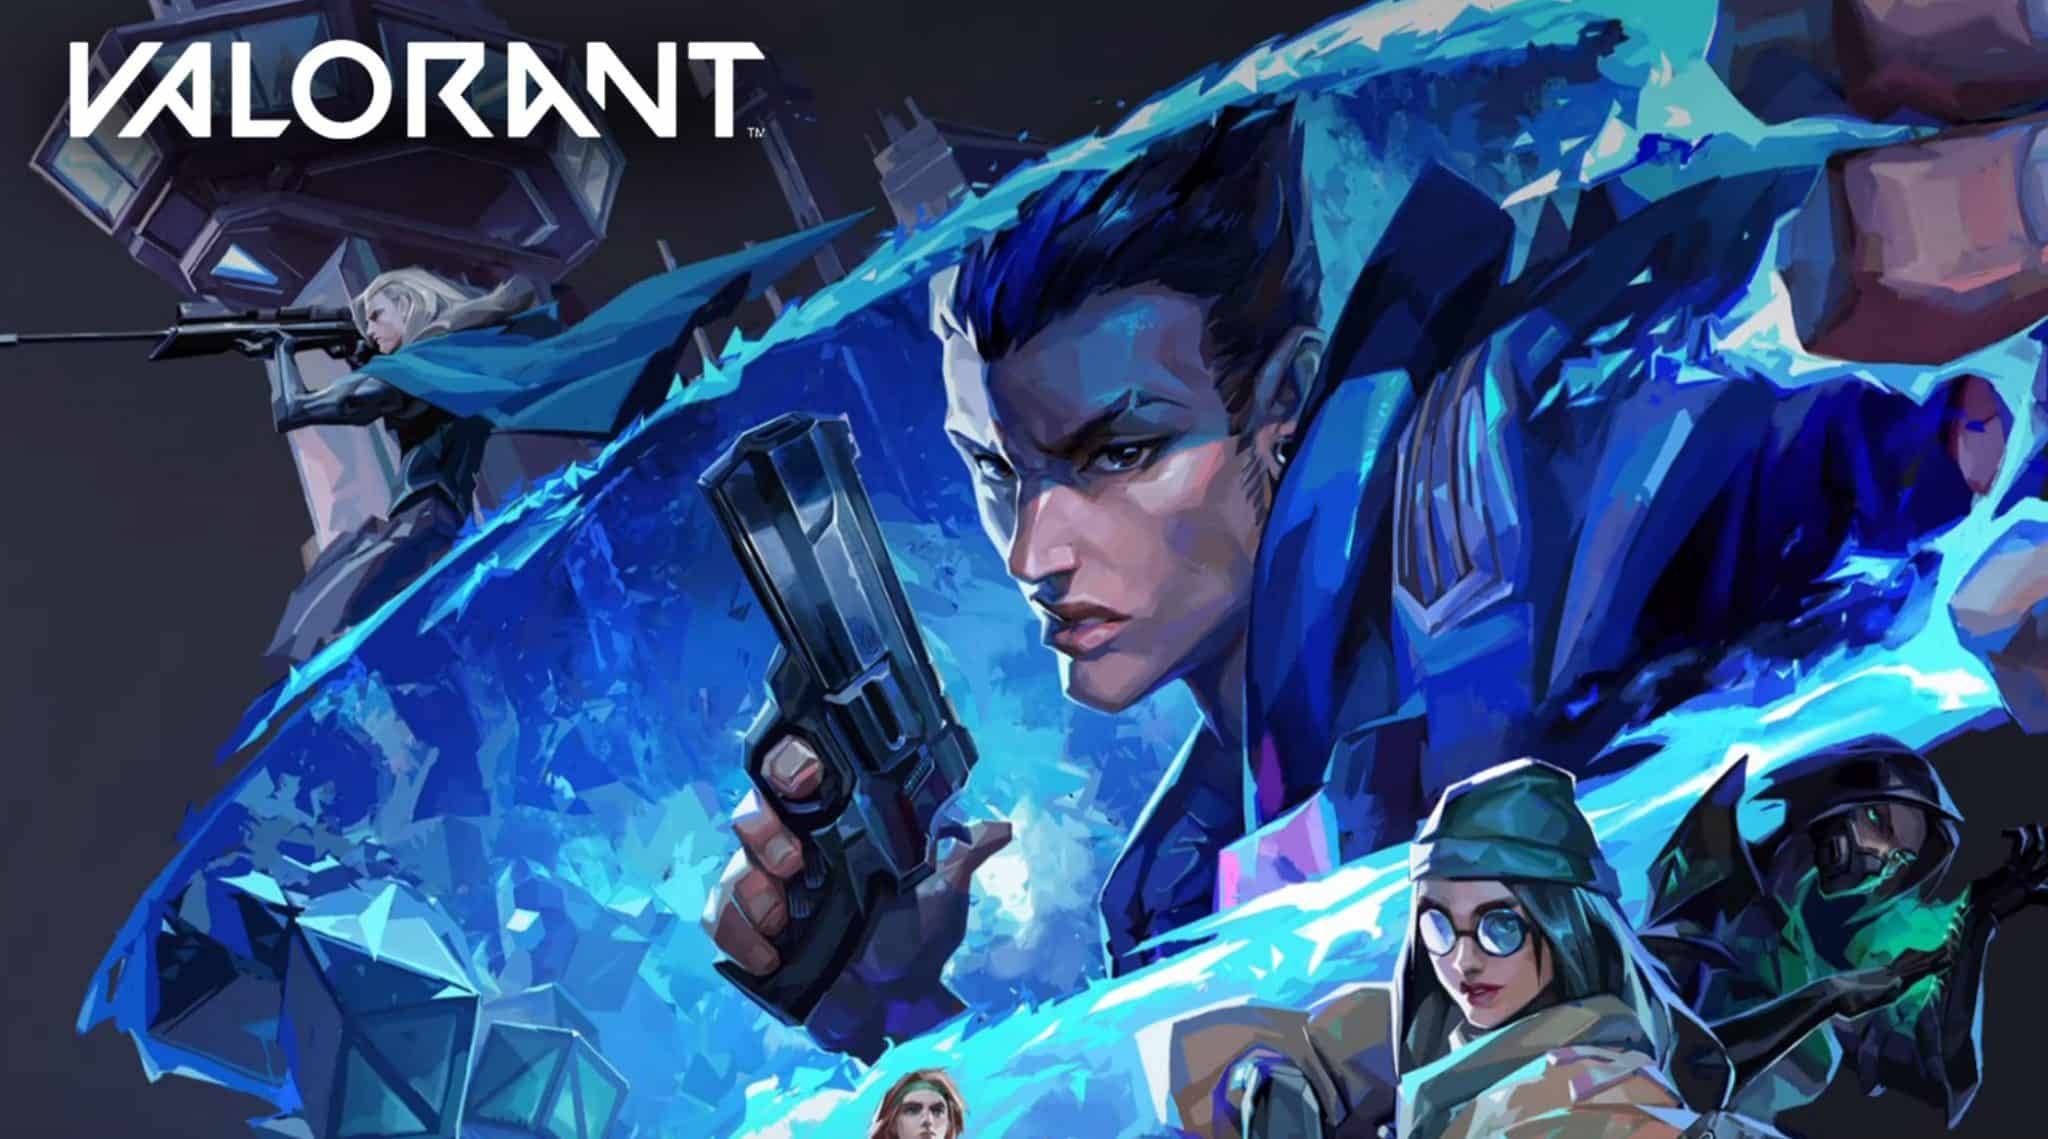 Valorant Arcane Jinx card: Now you can claim new Valorant card through Prime  Gaming. - The SportsRush